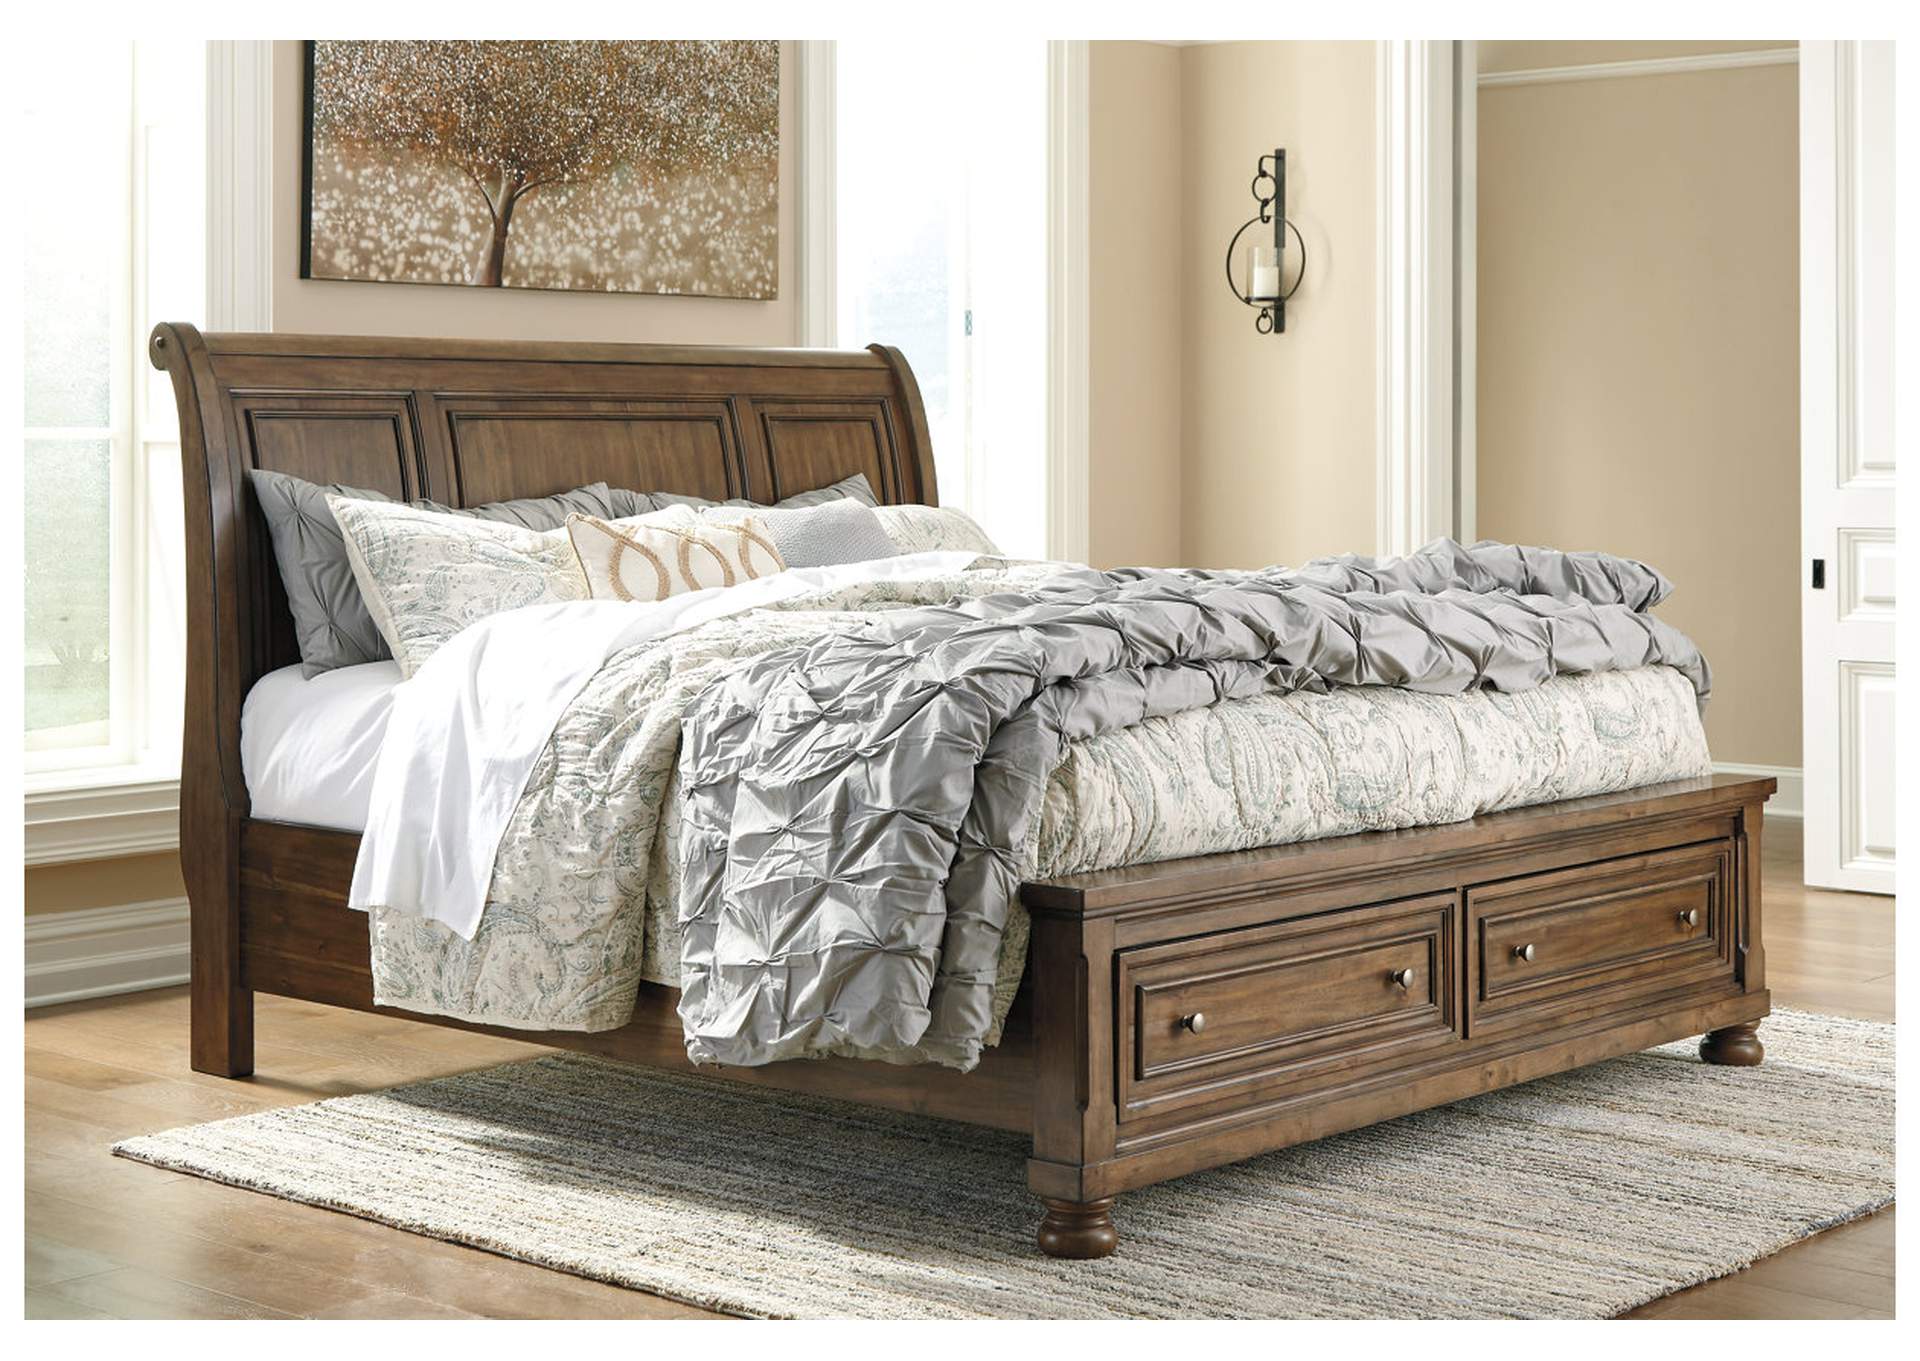 Flynnter California King Sleigh Bed with 2 Storage Drawers,Signature Design By Ashley